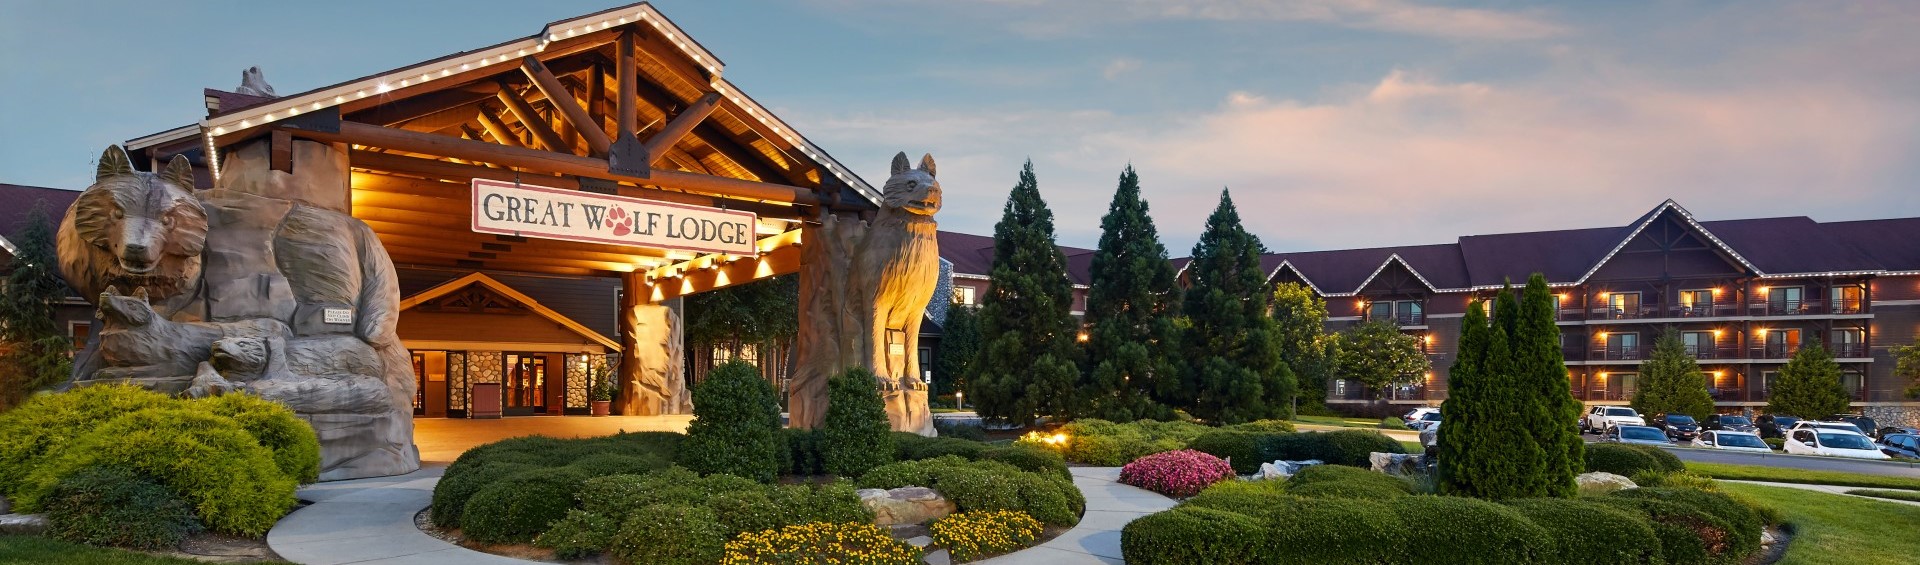 Great wolf lodge Concord